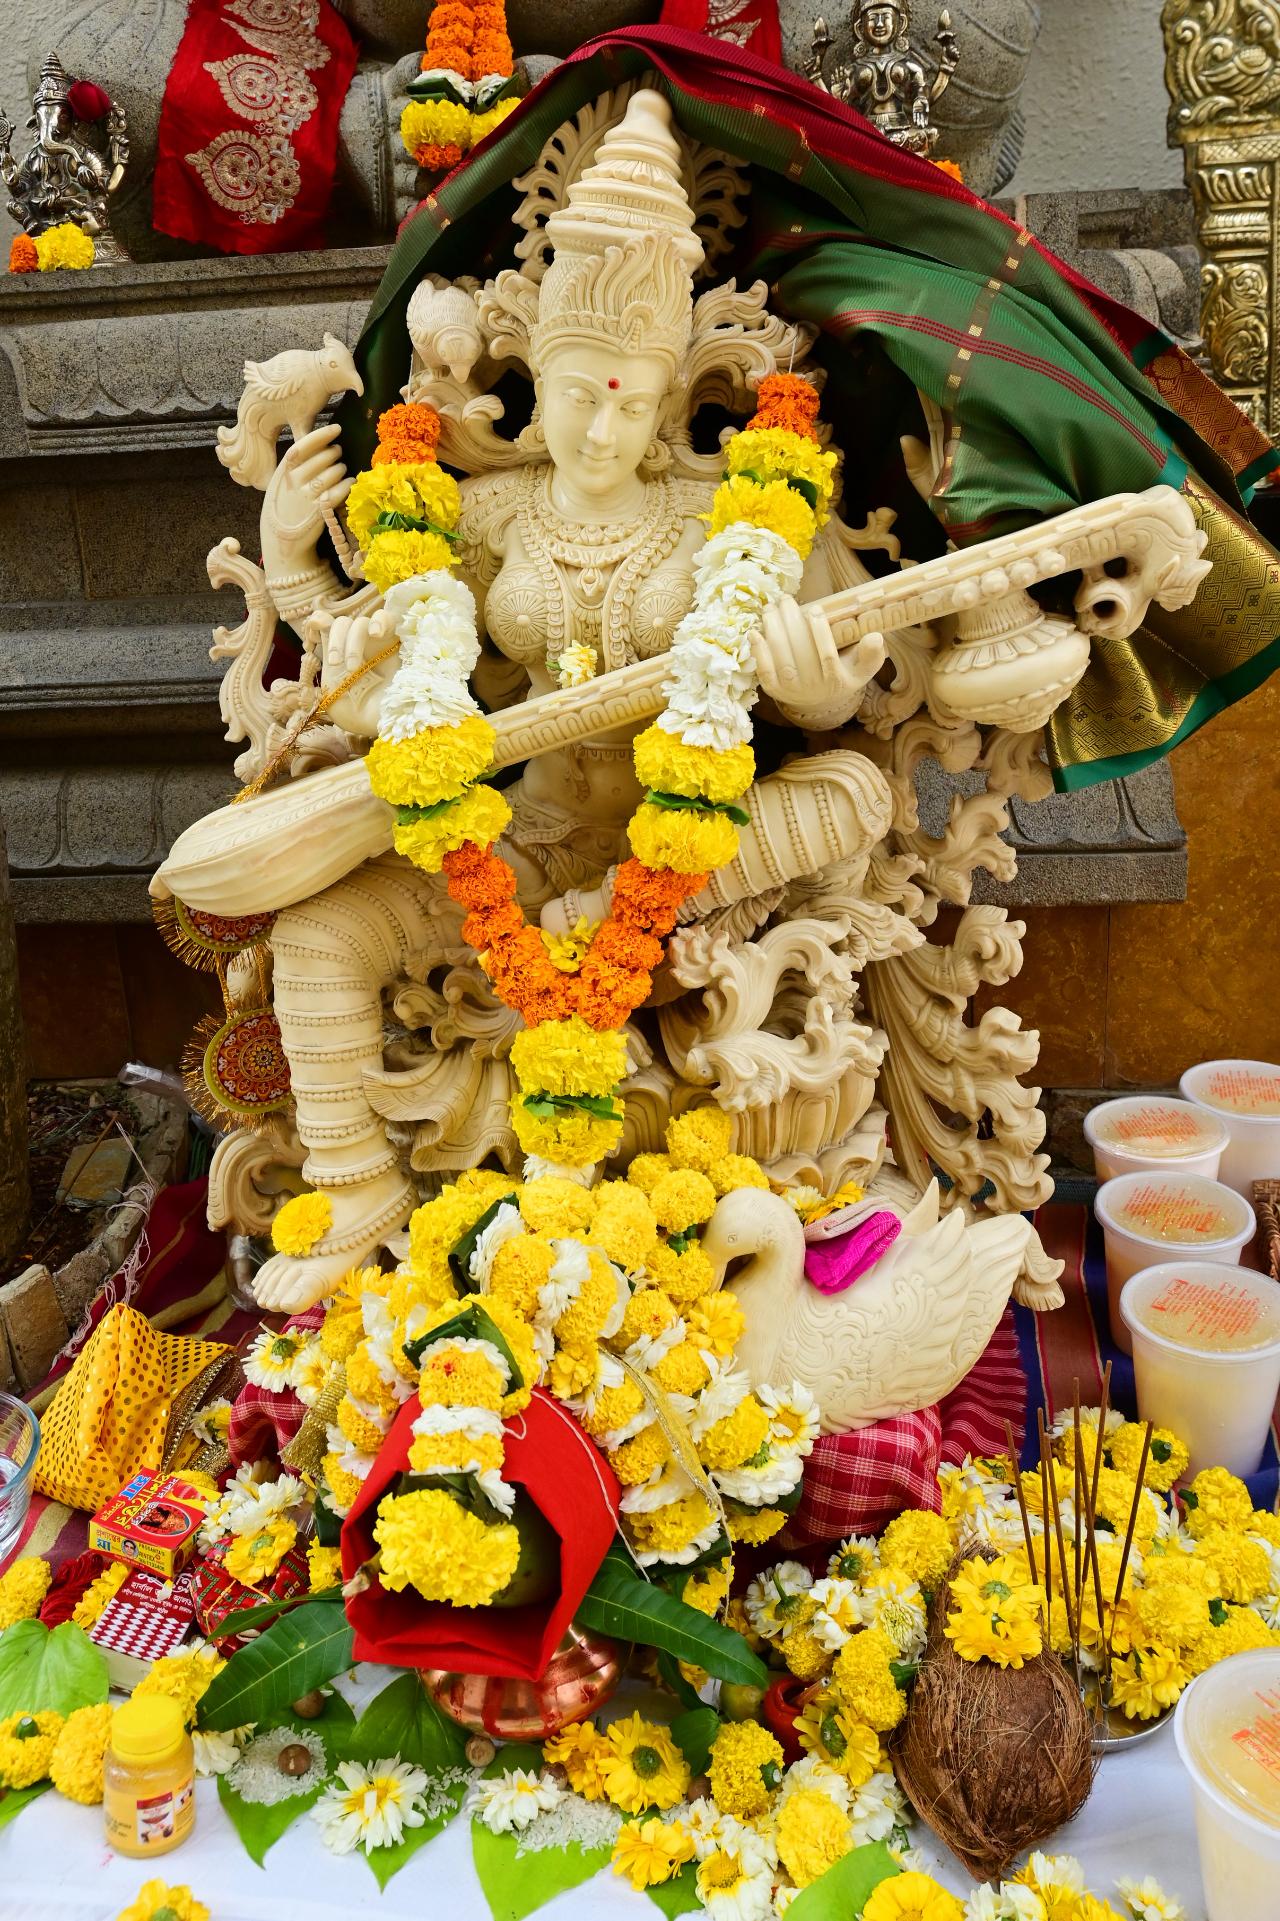 Vasant Panchami is one of the most popular spring festivals of India, celebrated across different parts of the country with fun and fervour. The festival is also celebrated to mark the birth of Goddess Saraswati, who symbolises knowledge, wisdom, purity, and truth